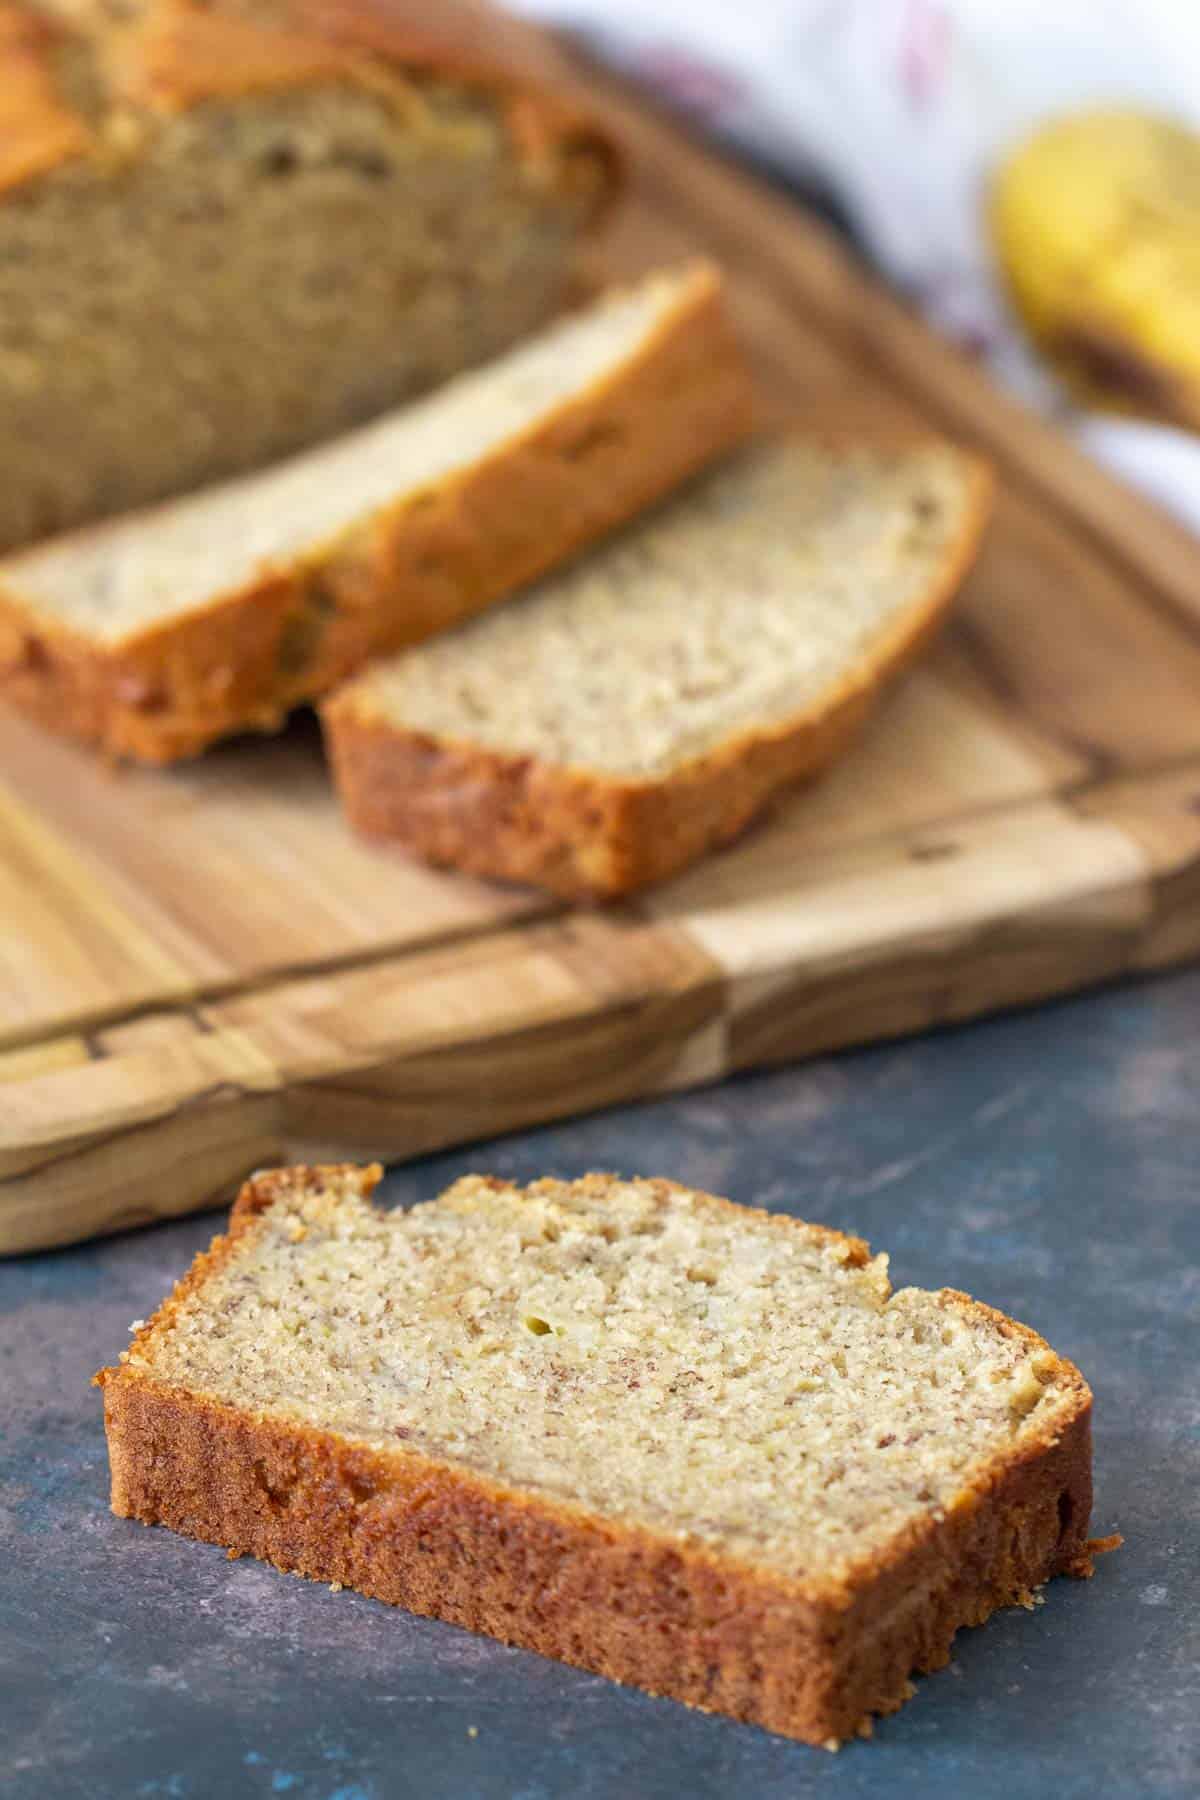 Slice of banana bread with other slices in the background.